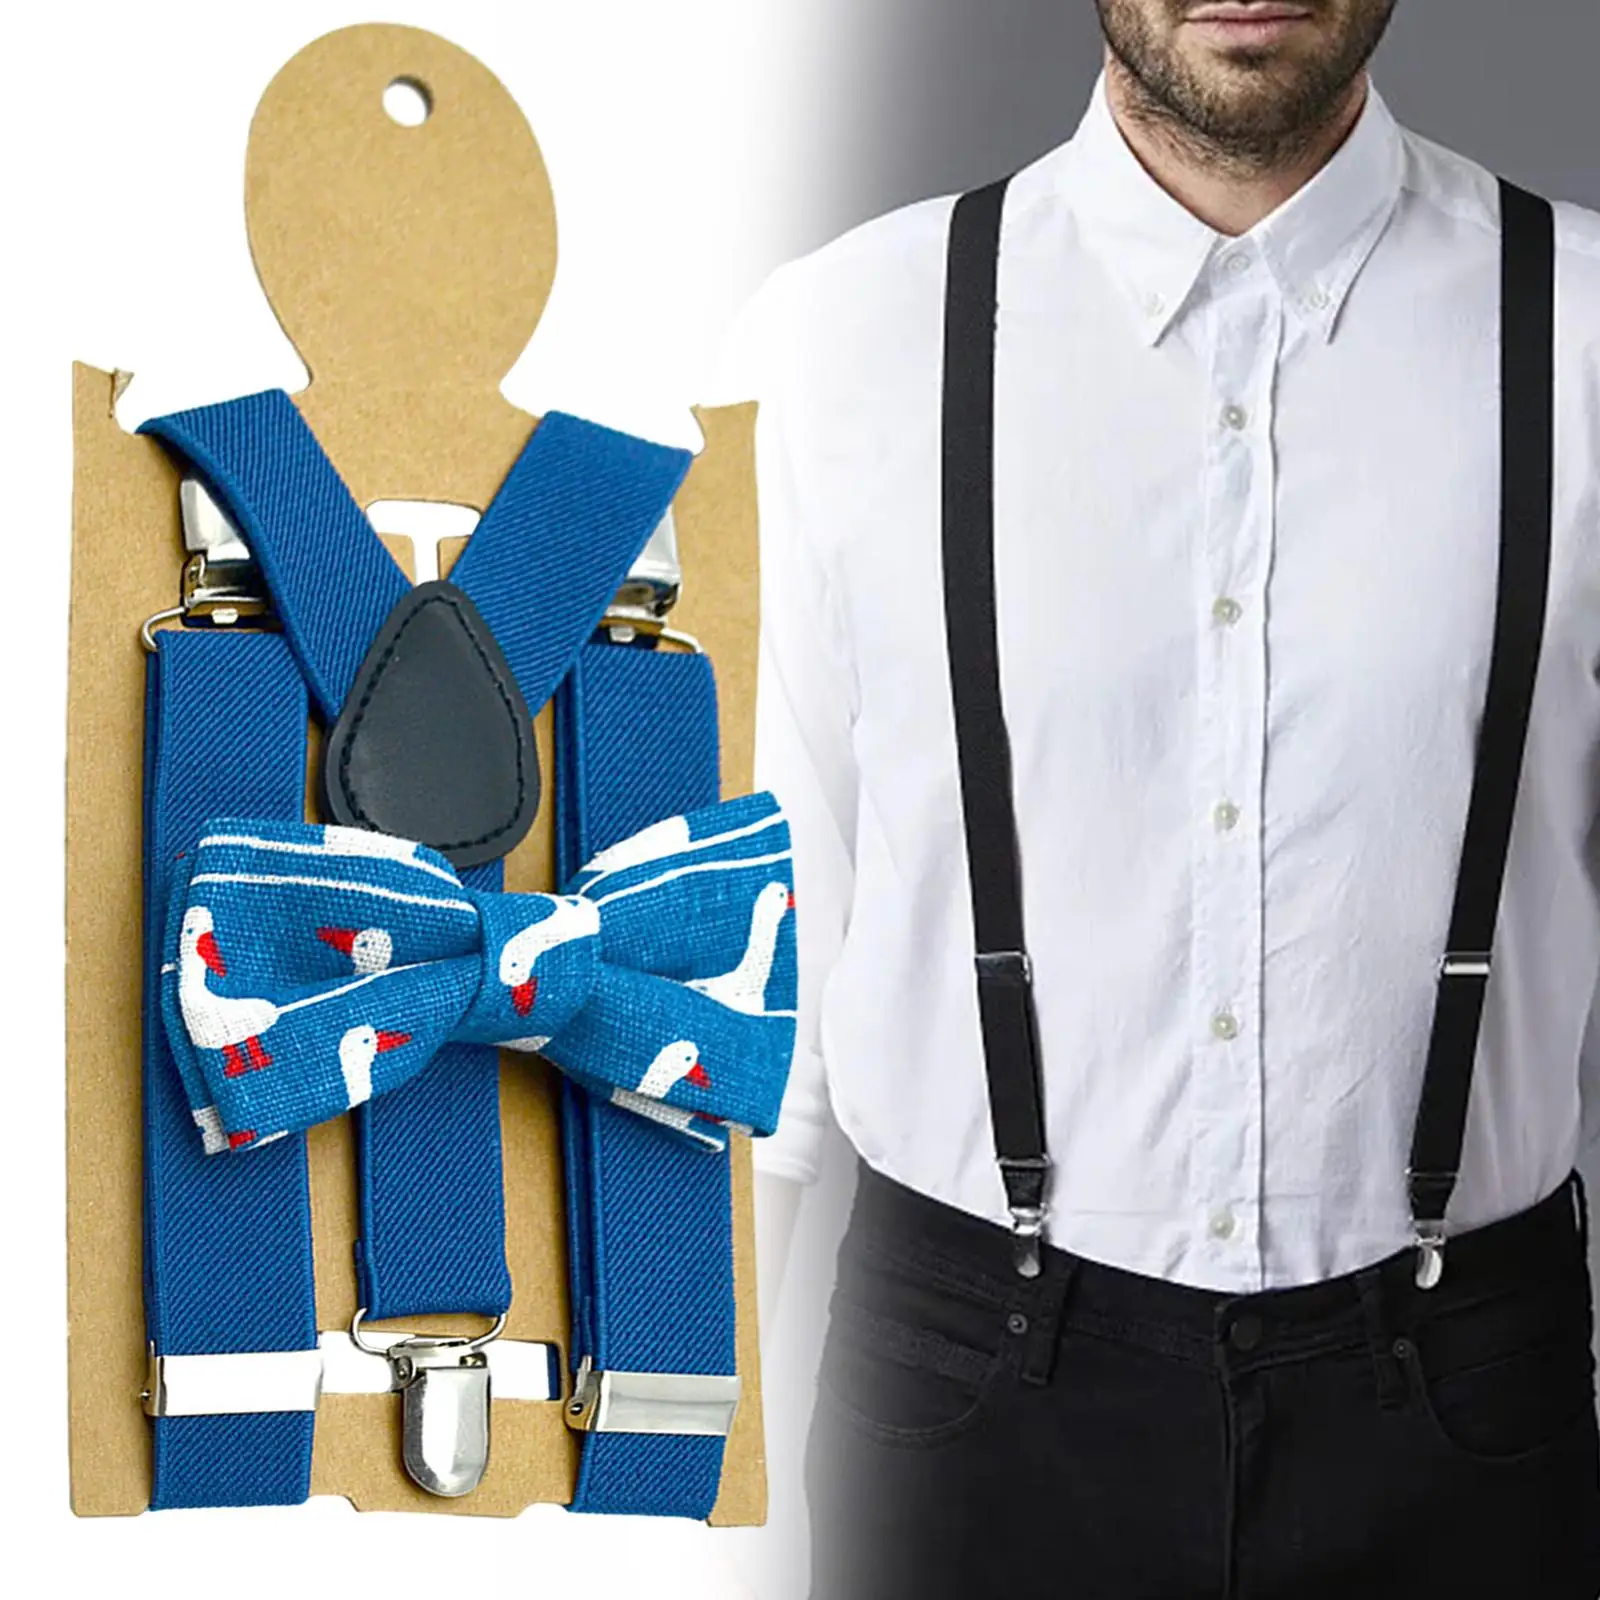 Kids Suspenders Bow Tie Set Boys Girls Baby Braces Adjustable Braces for Trousers Cosplay Party Favors Dance Costume Halloween